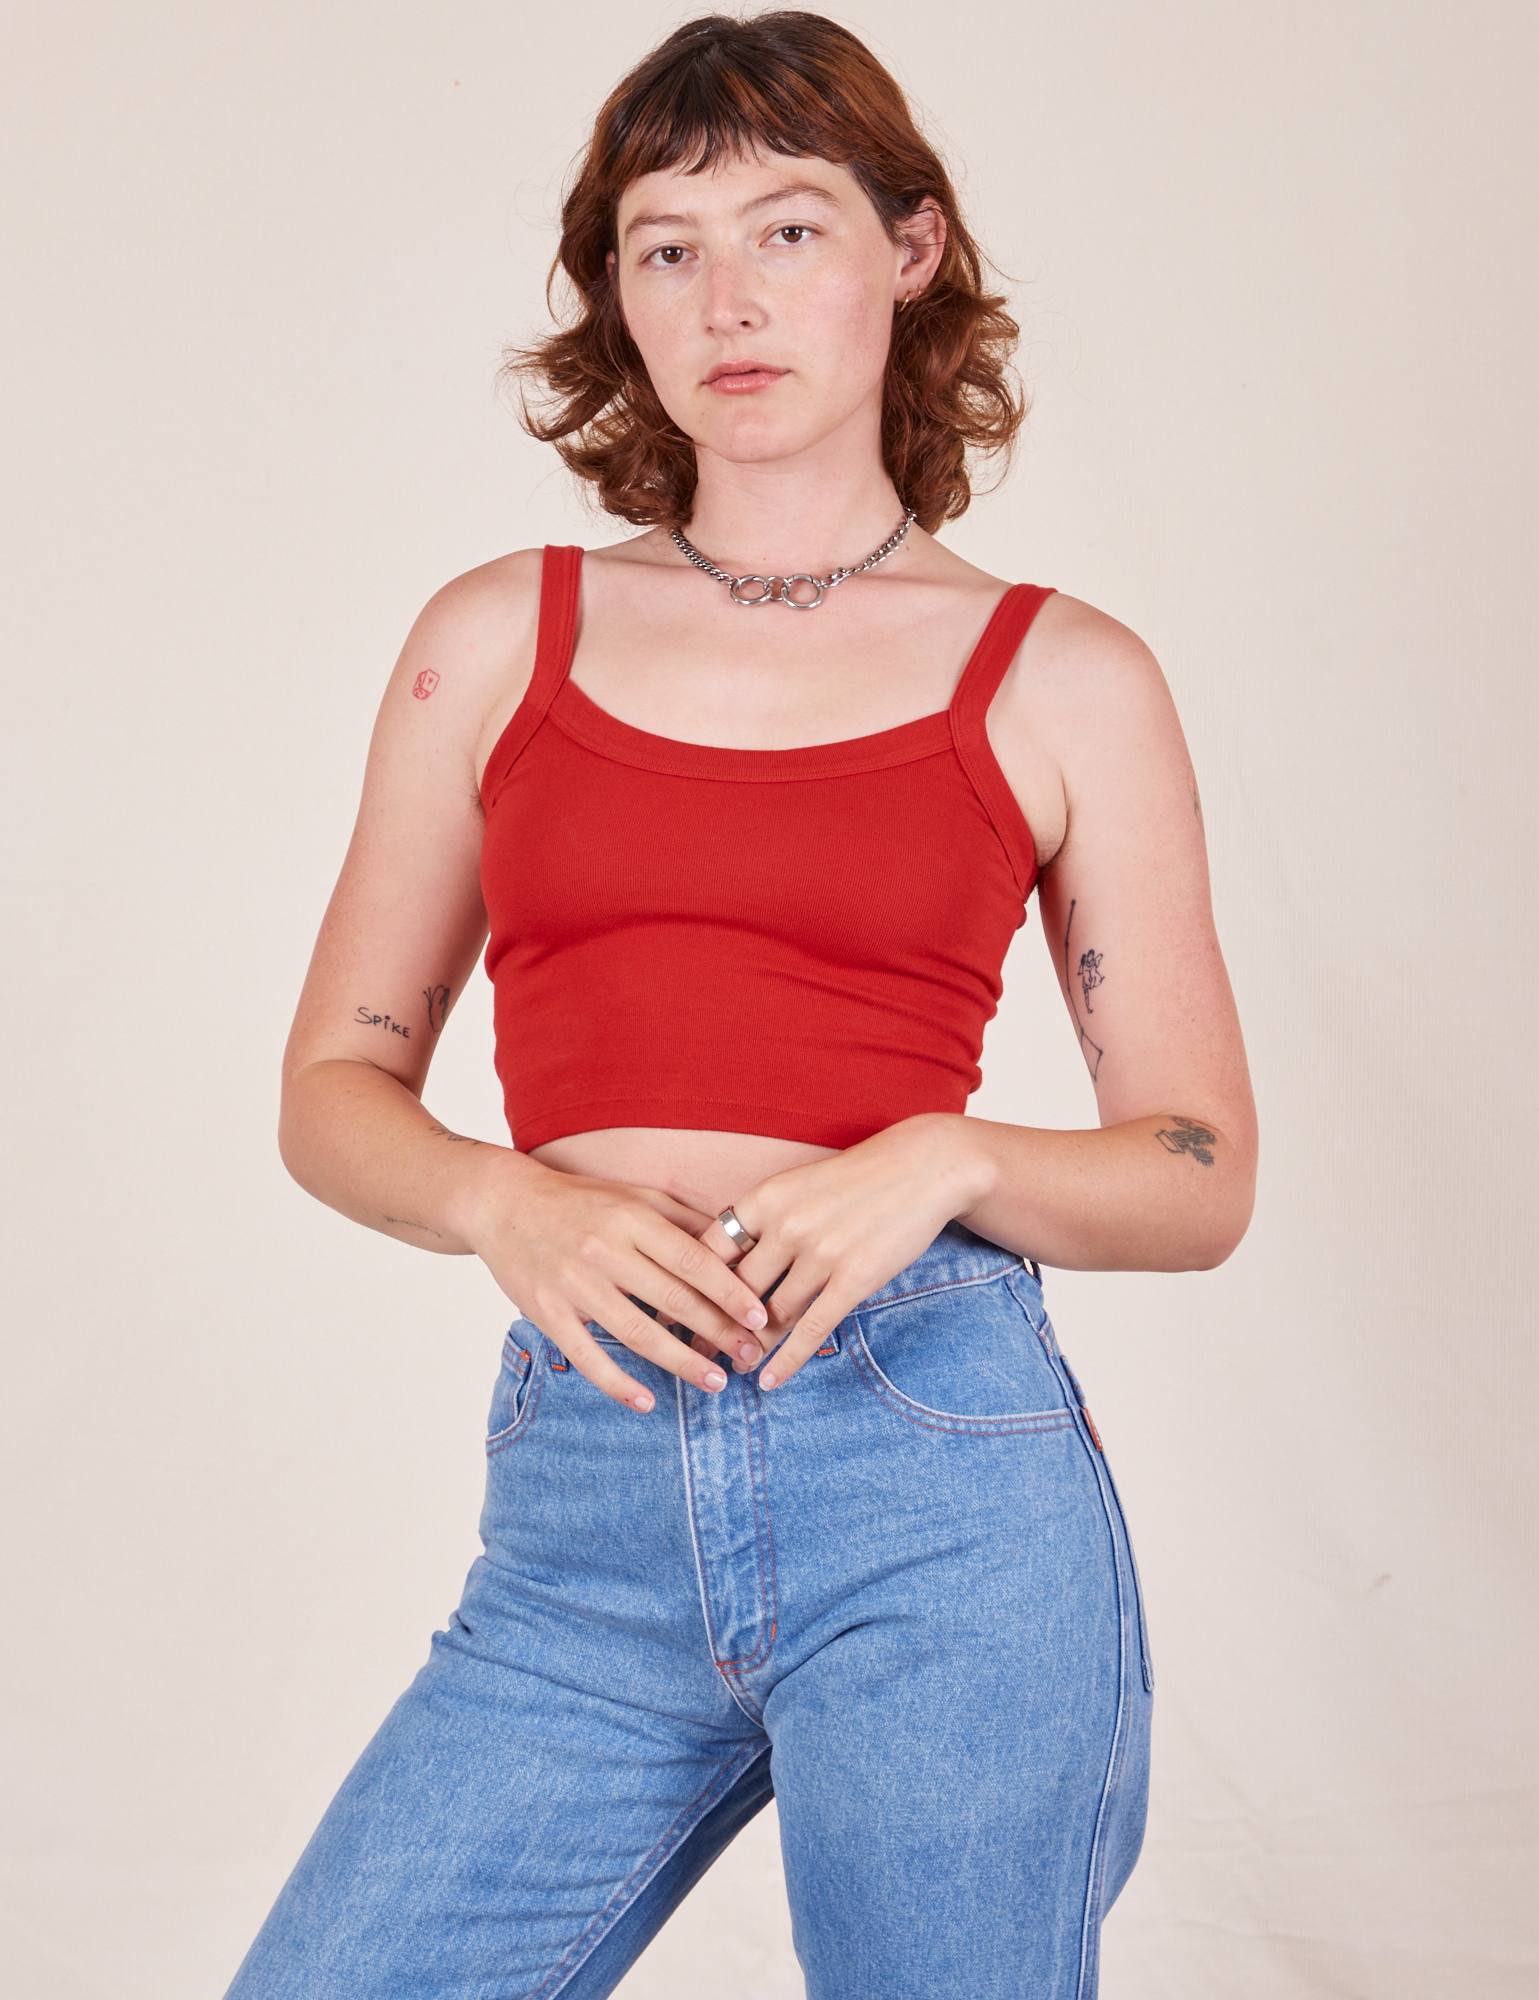 Alex is wearing Cropped Cami in Mustang Red and light wash Frontier Jeans